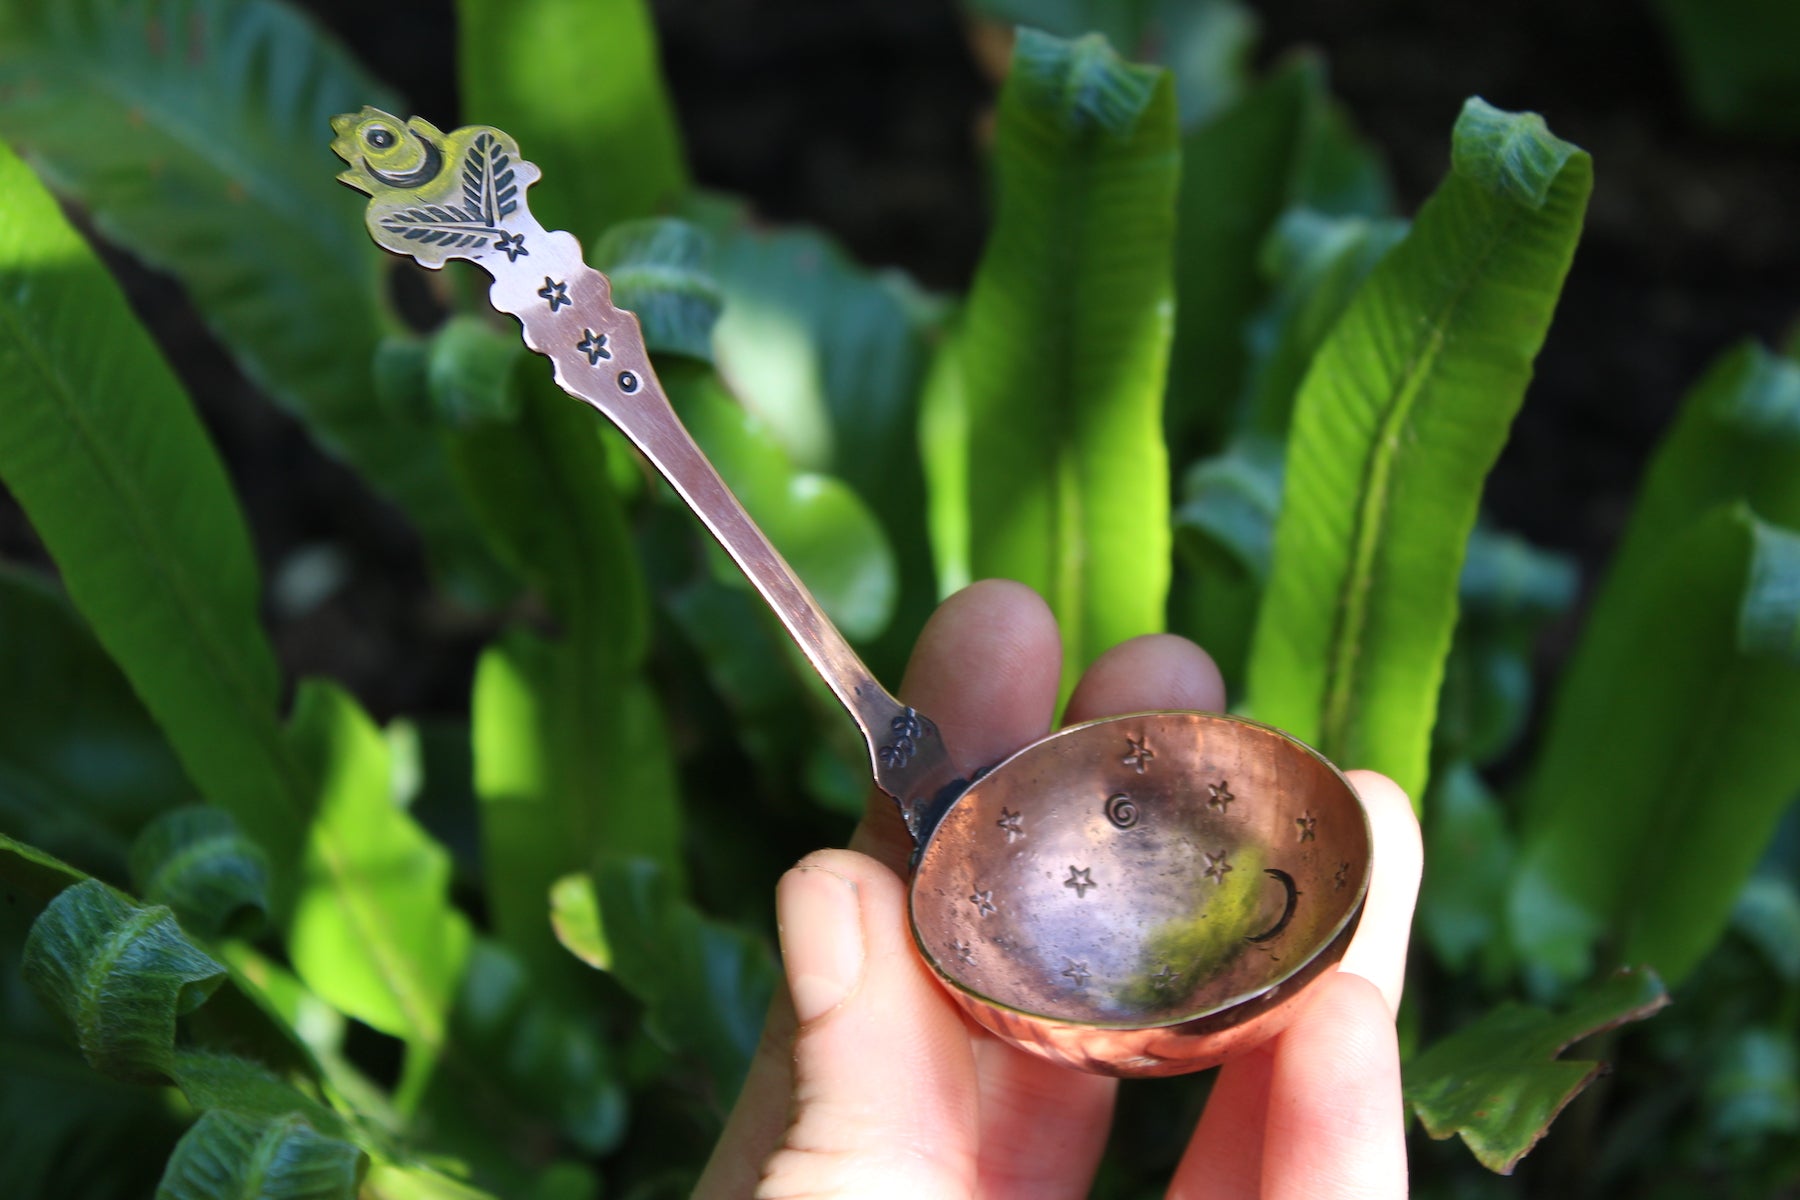 WITCHES SPOON No. 1 - Handmade Copper Spoon